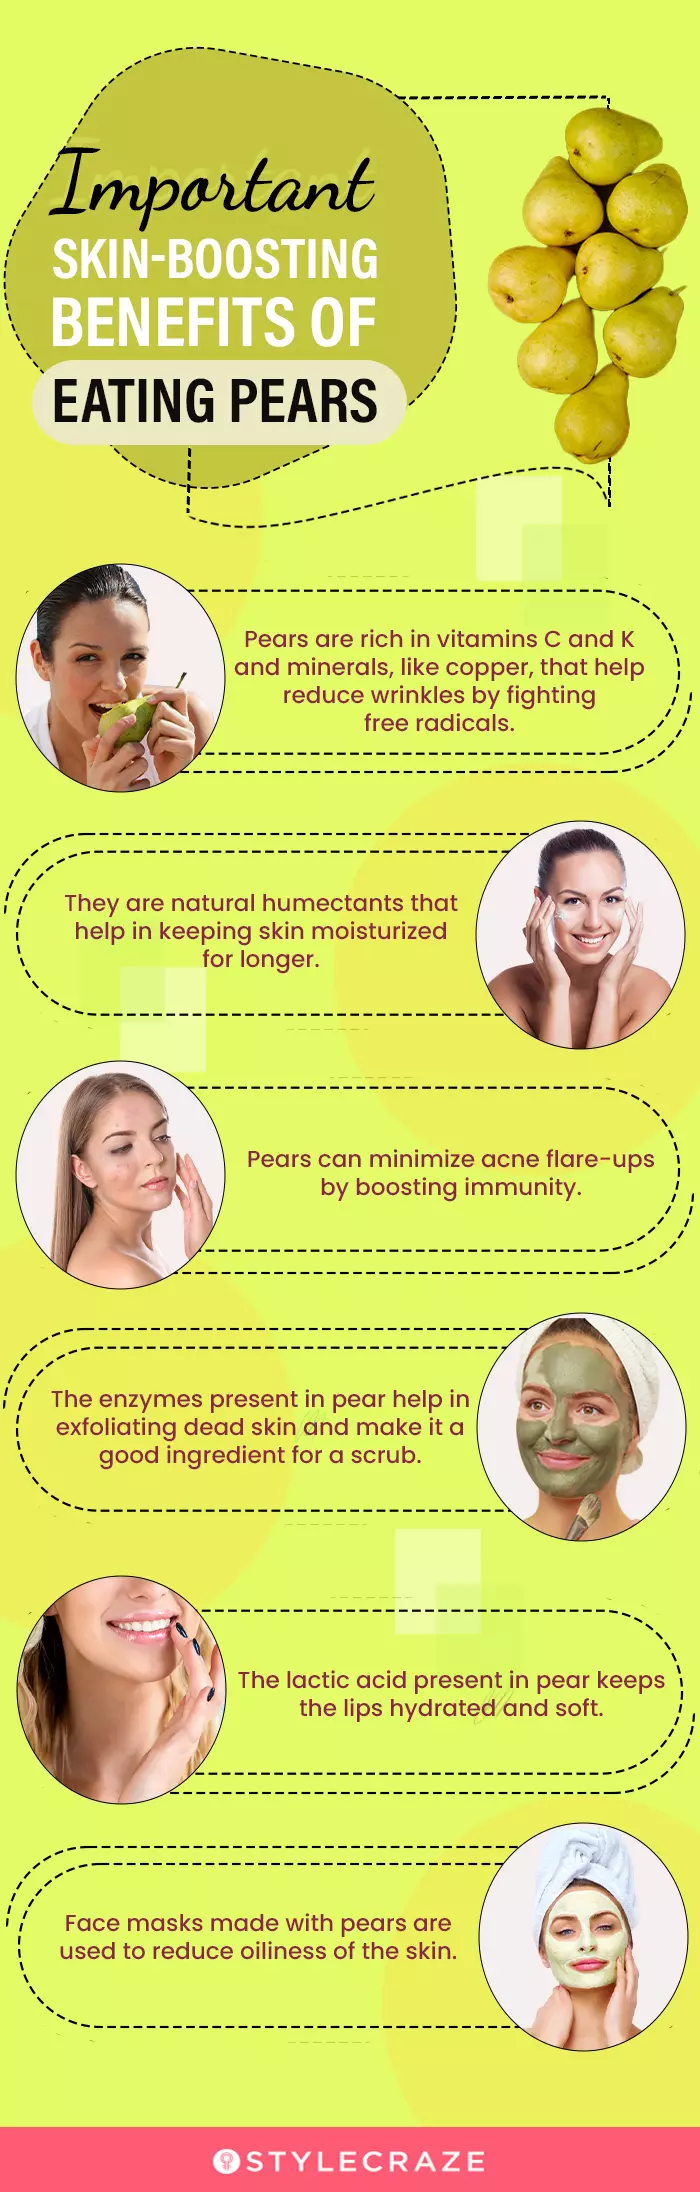 important skin boosting benefits of eating pears (infographic)